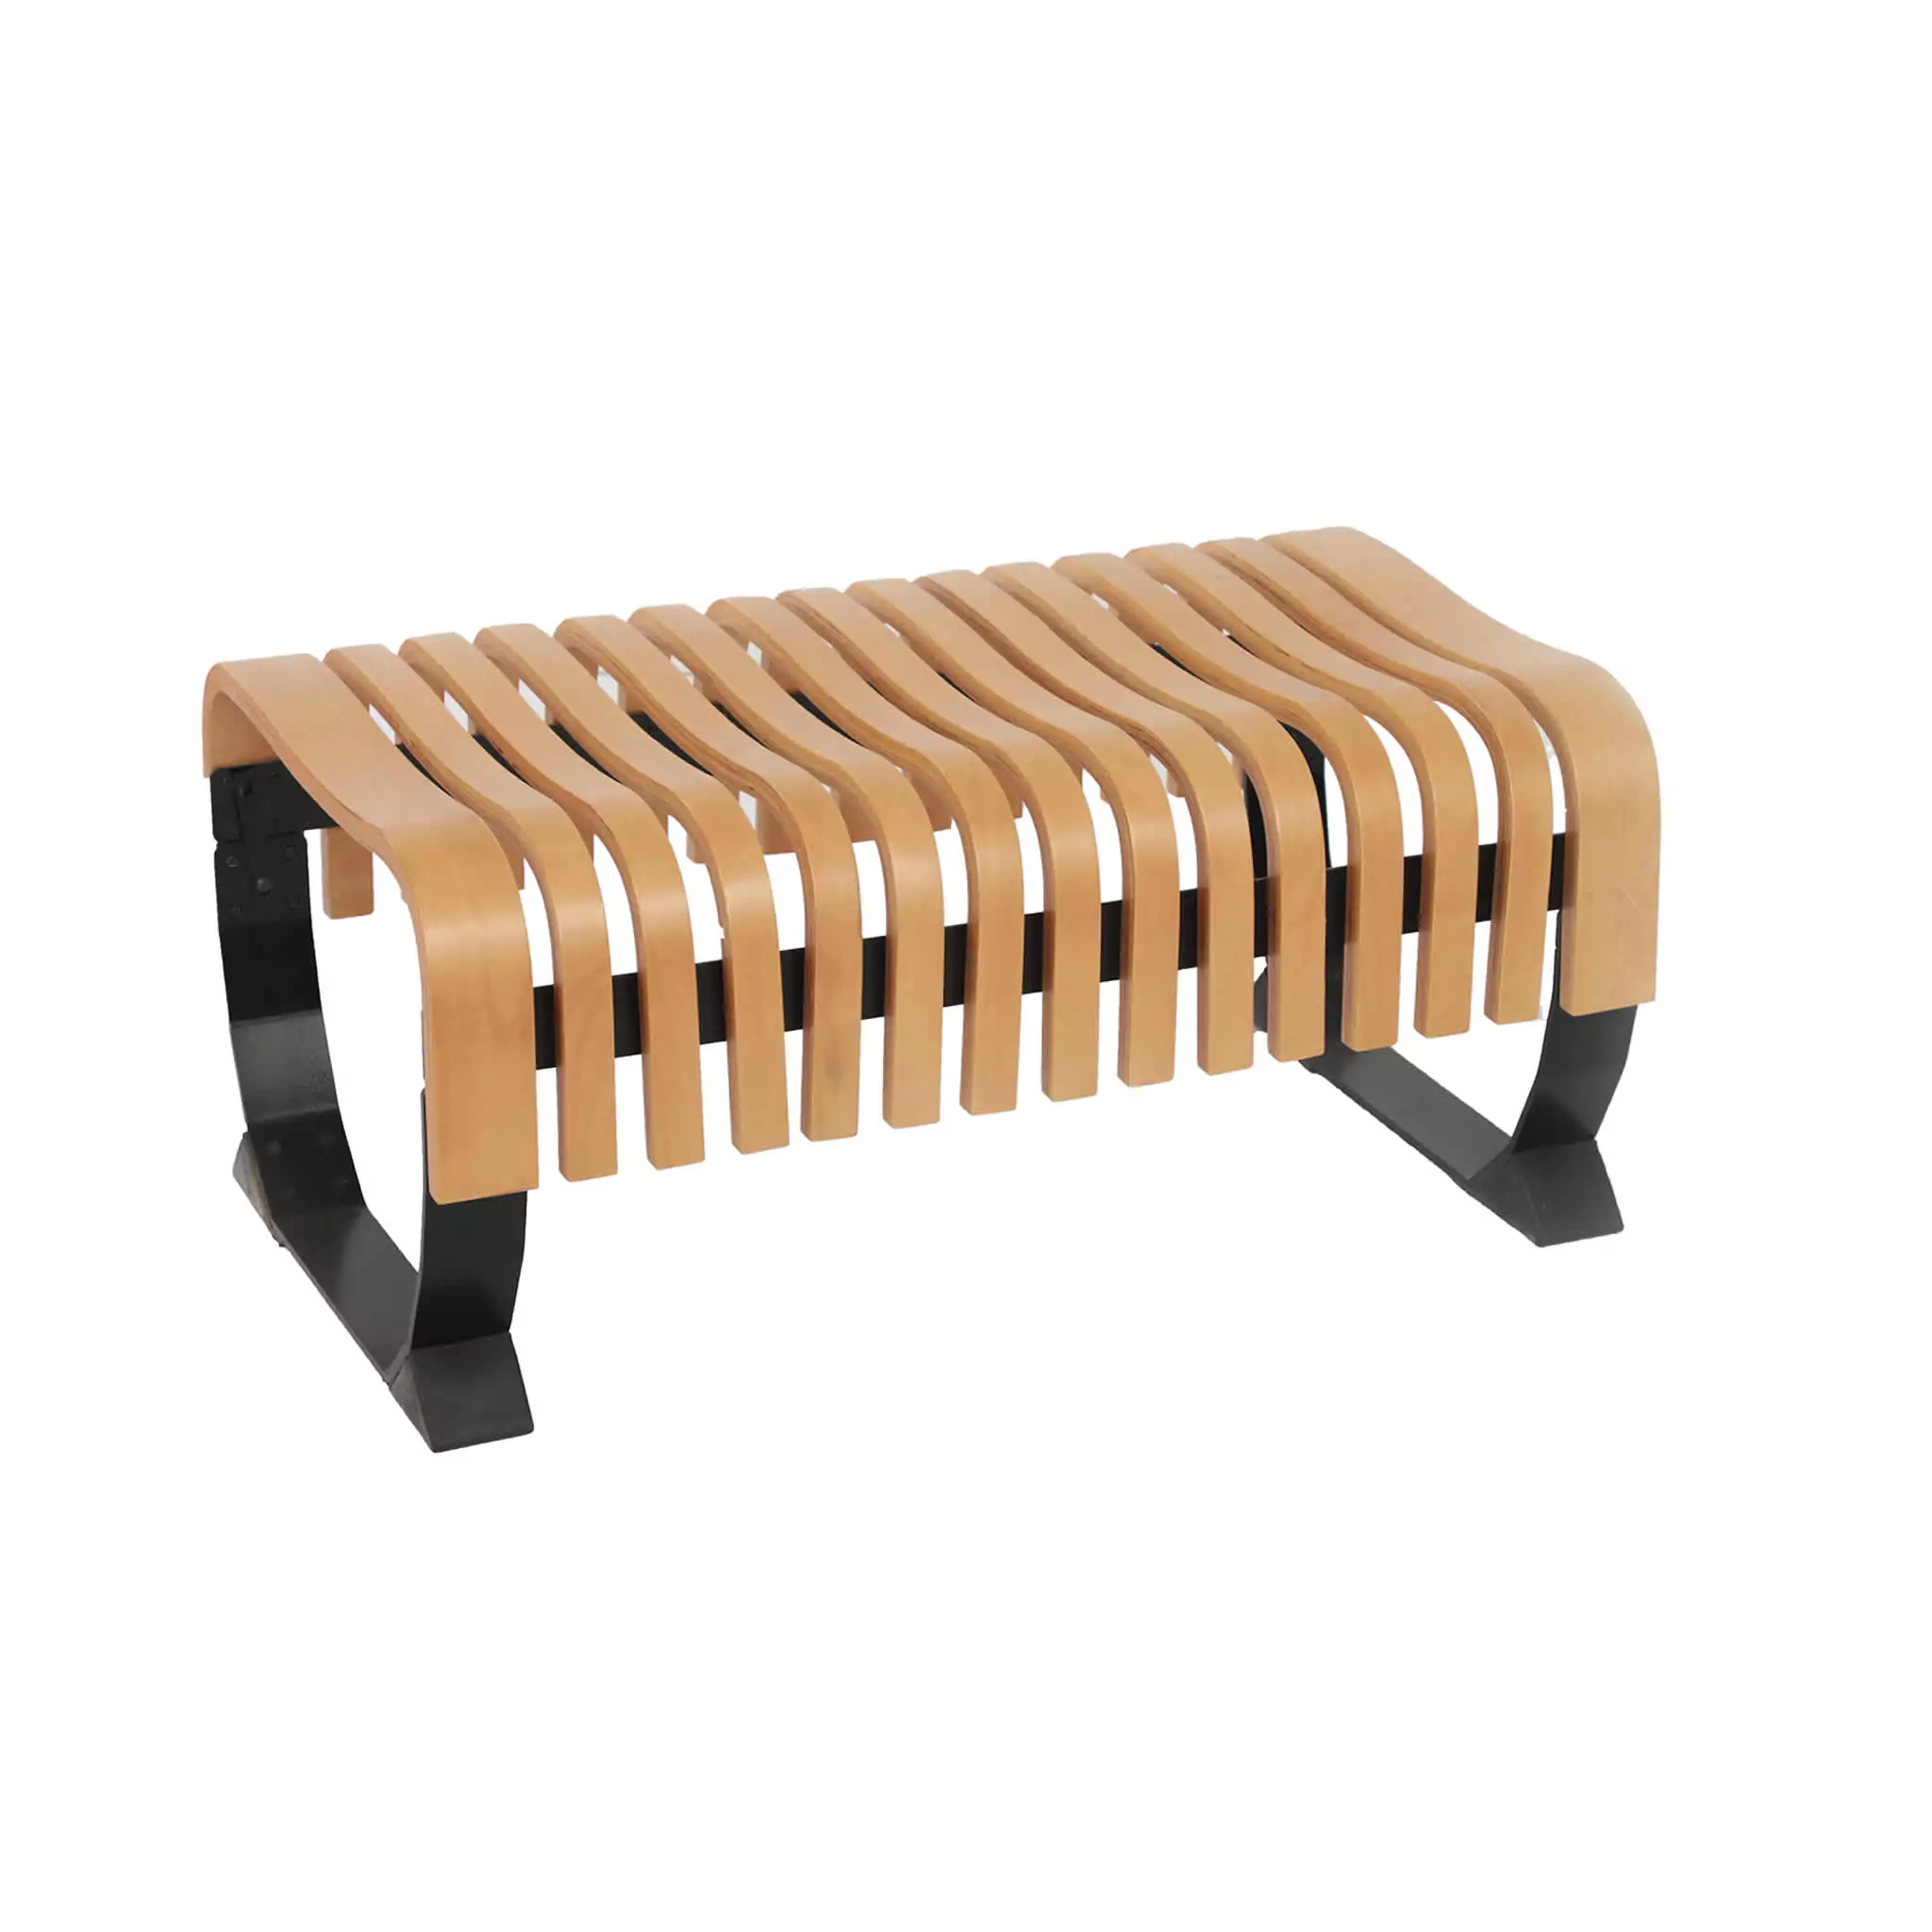 Seat Model: WOODEN BENCH Image